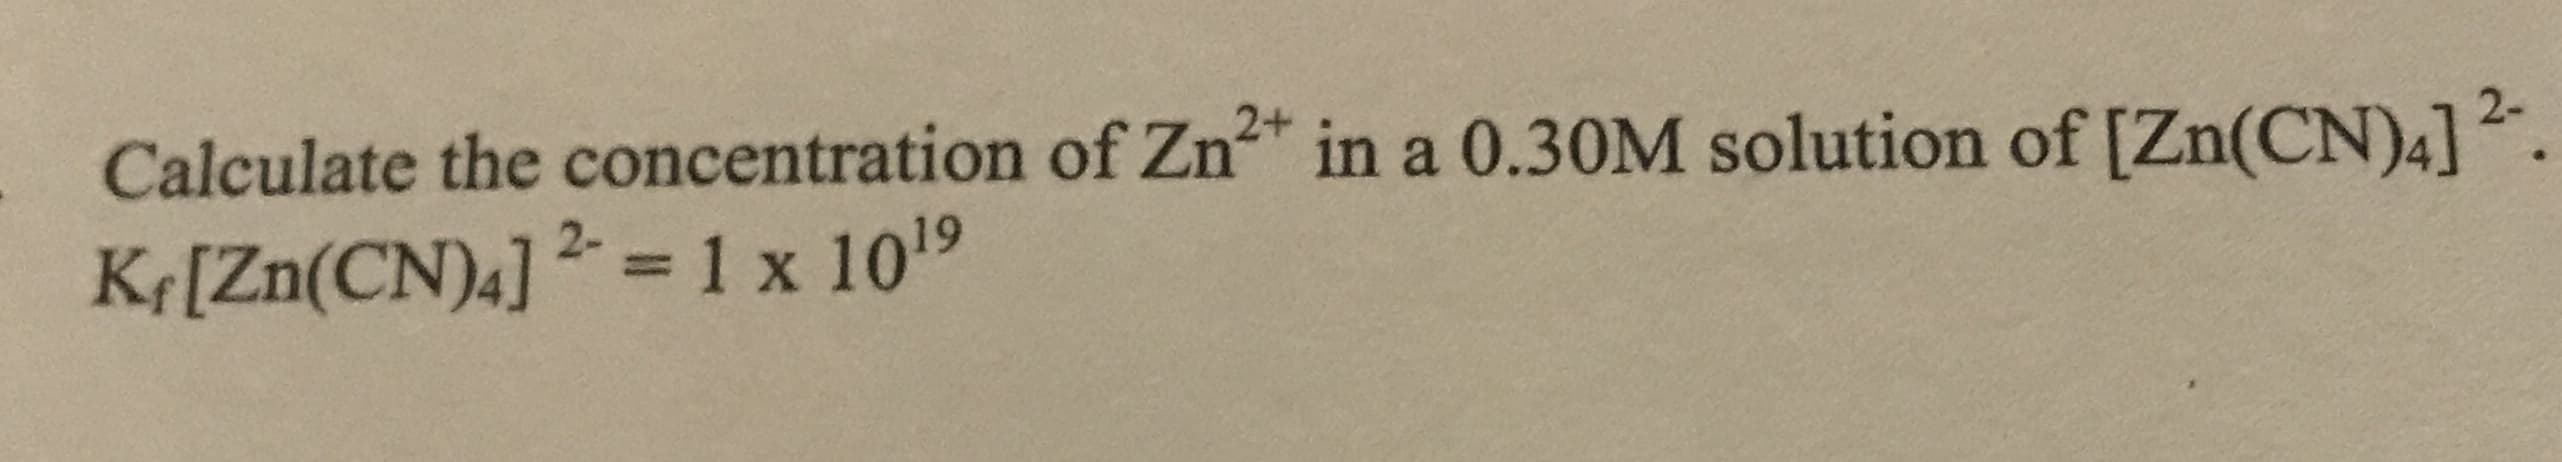 Calculate the concentration of Zn* in a 0.30M solution of [Zn(CN)4]2.
K¢[Zn(CN)4] 2 = 1 x 109
